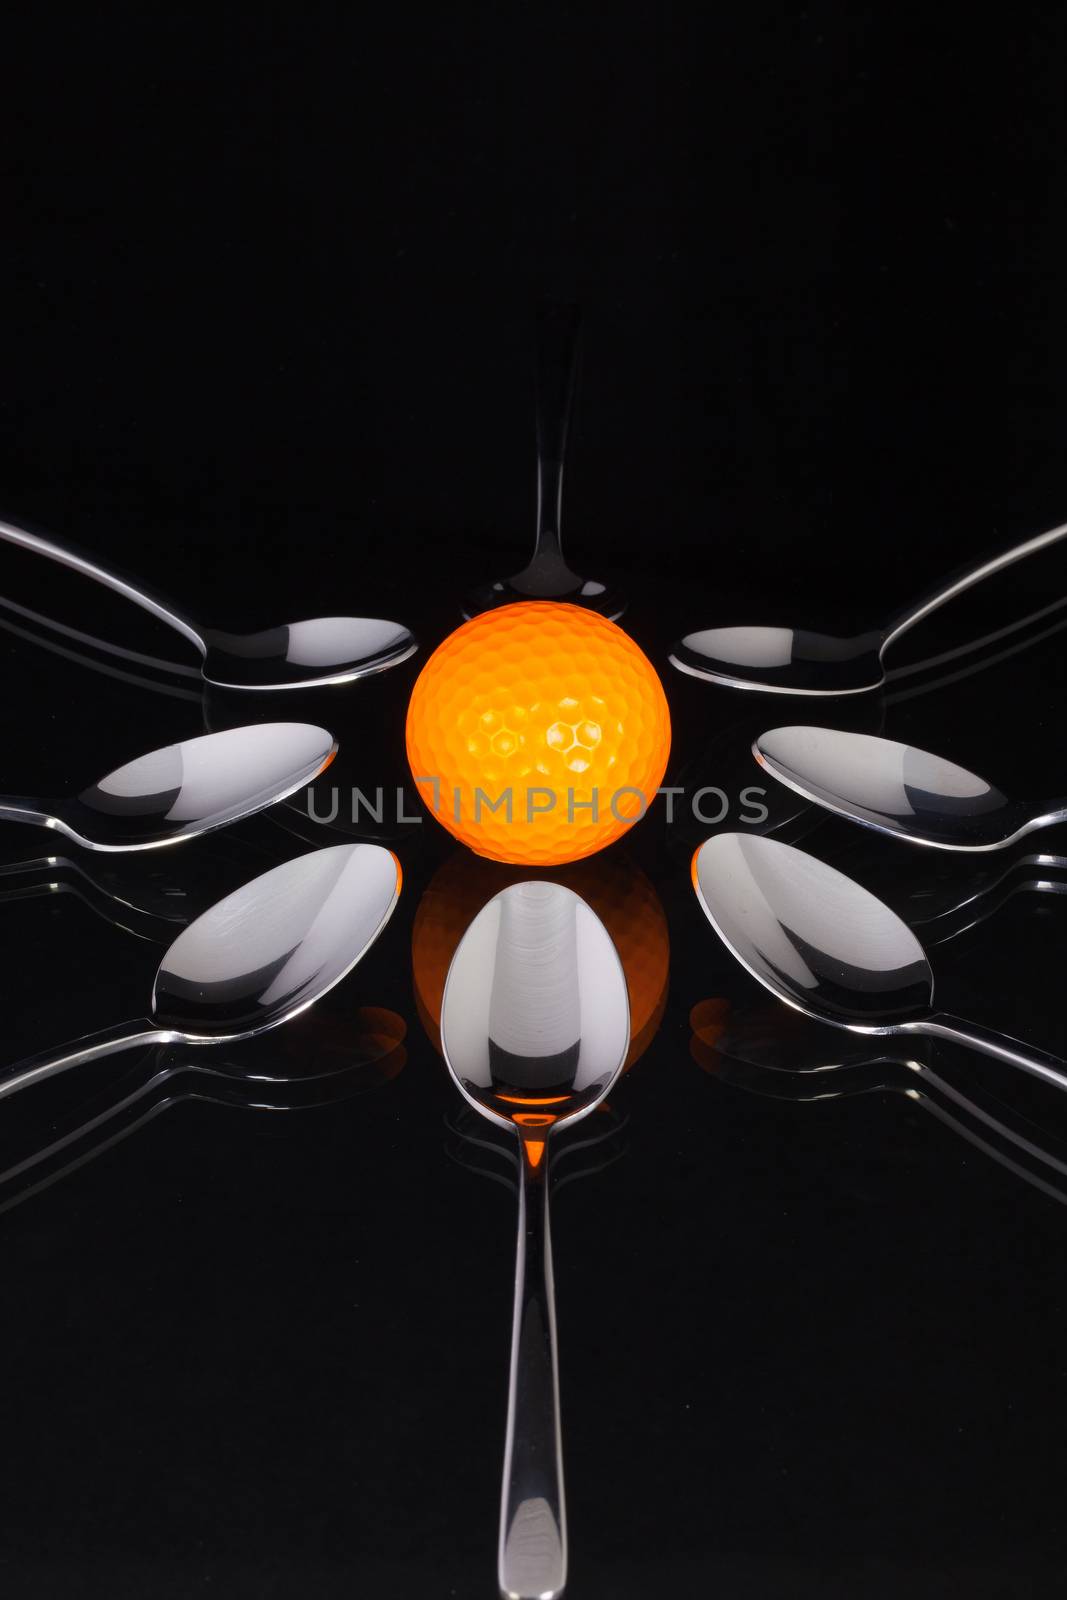 Teaspoons and orange golf ball on the black glass table  by CaptureLight